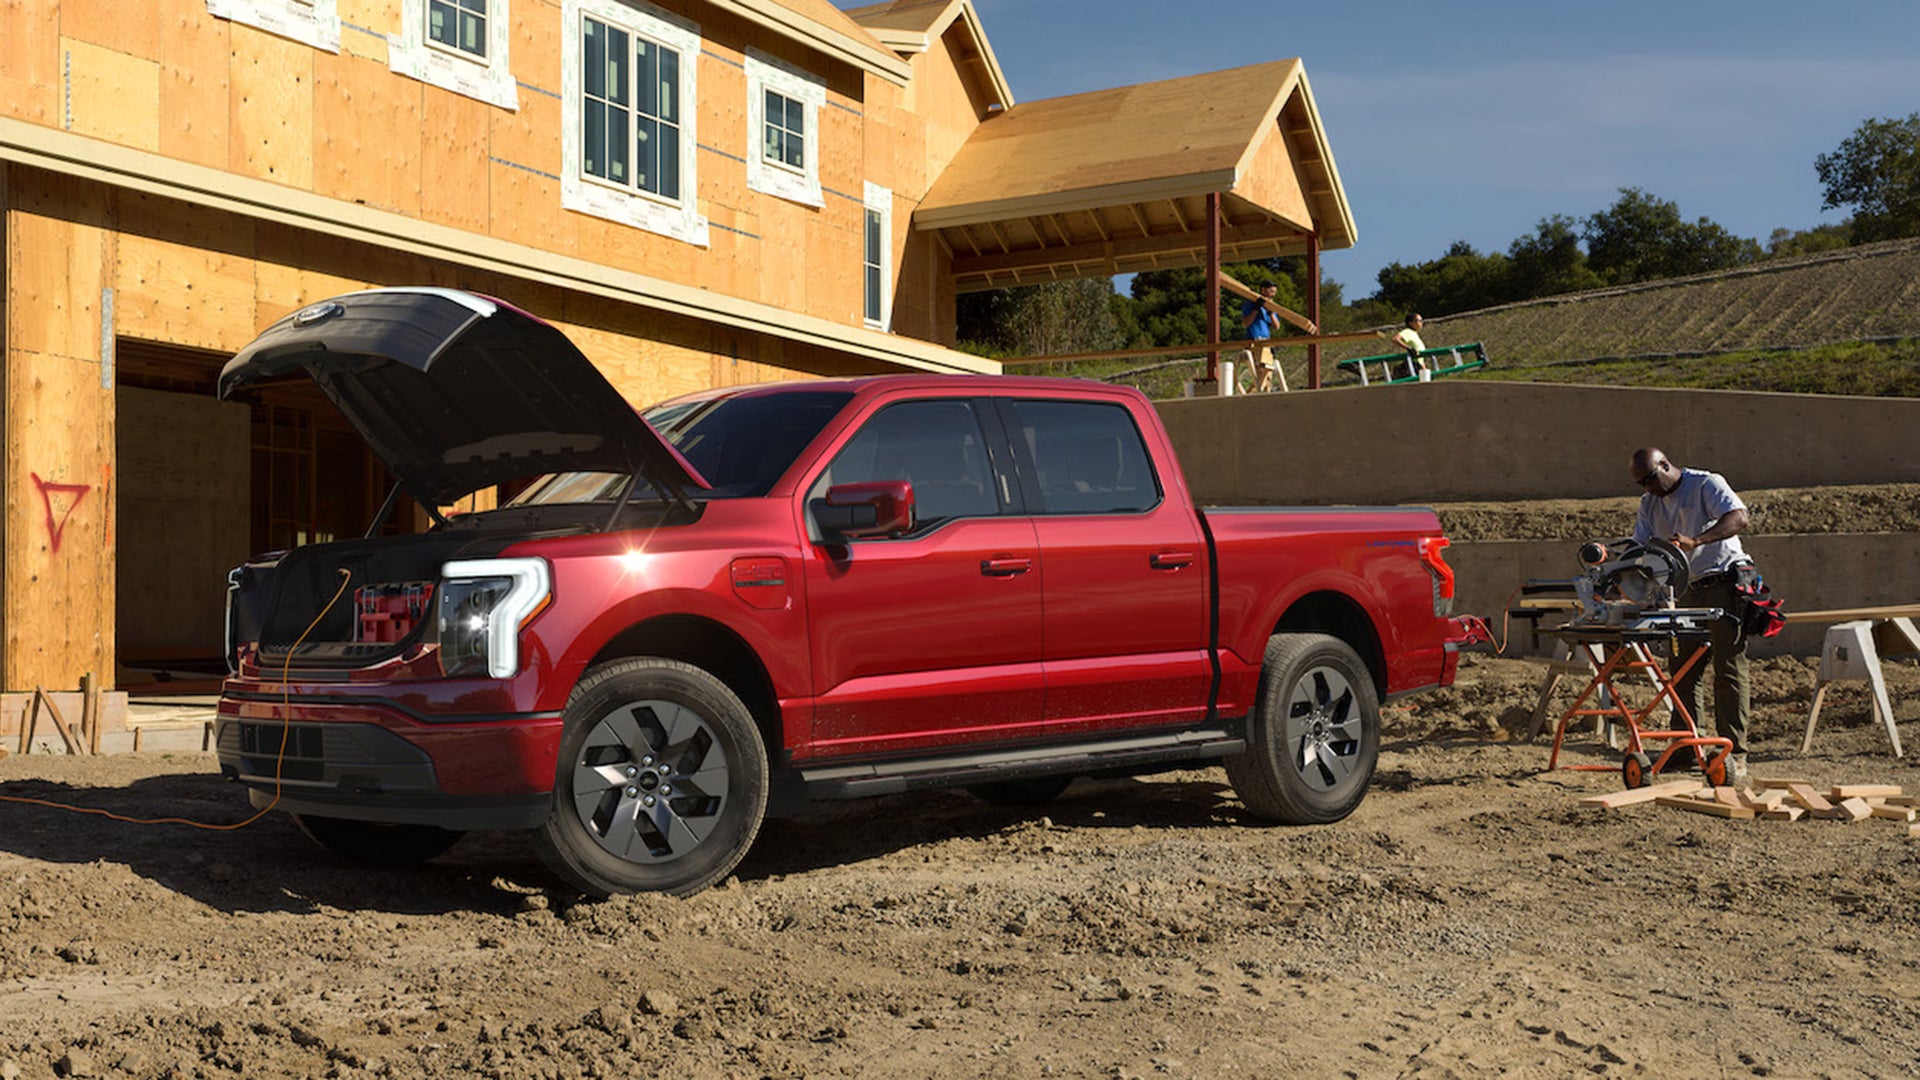 2022 Ford F-150 Lightning: A $40K Electric Pickup With 775 LB-FT of Torque